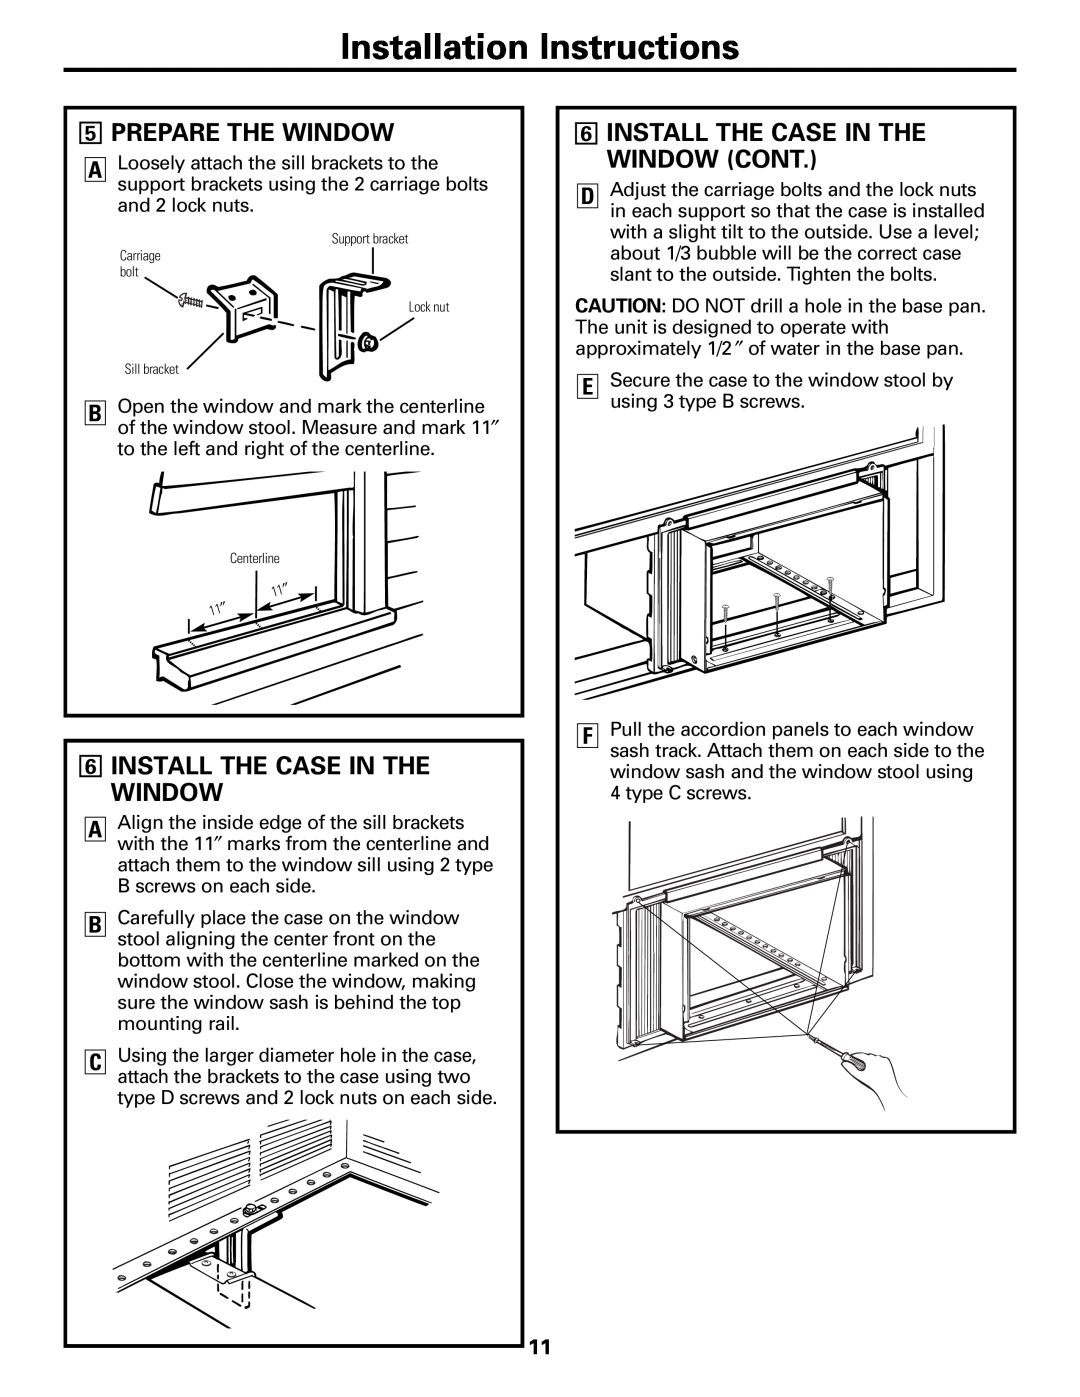 GE ASD06* operating instructions 5PREPARE THE WINDOW, 6INSTALL THE CASE IN THE WINDOW CONT, Installation Instructions 